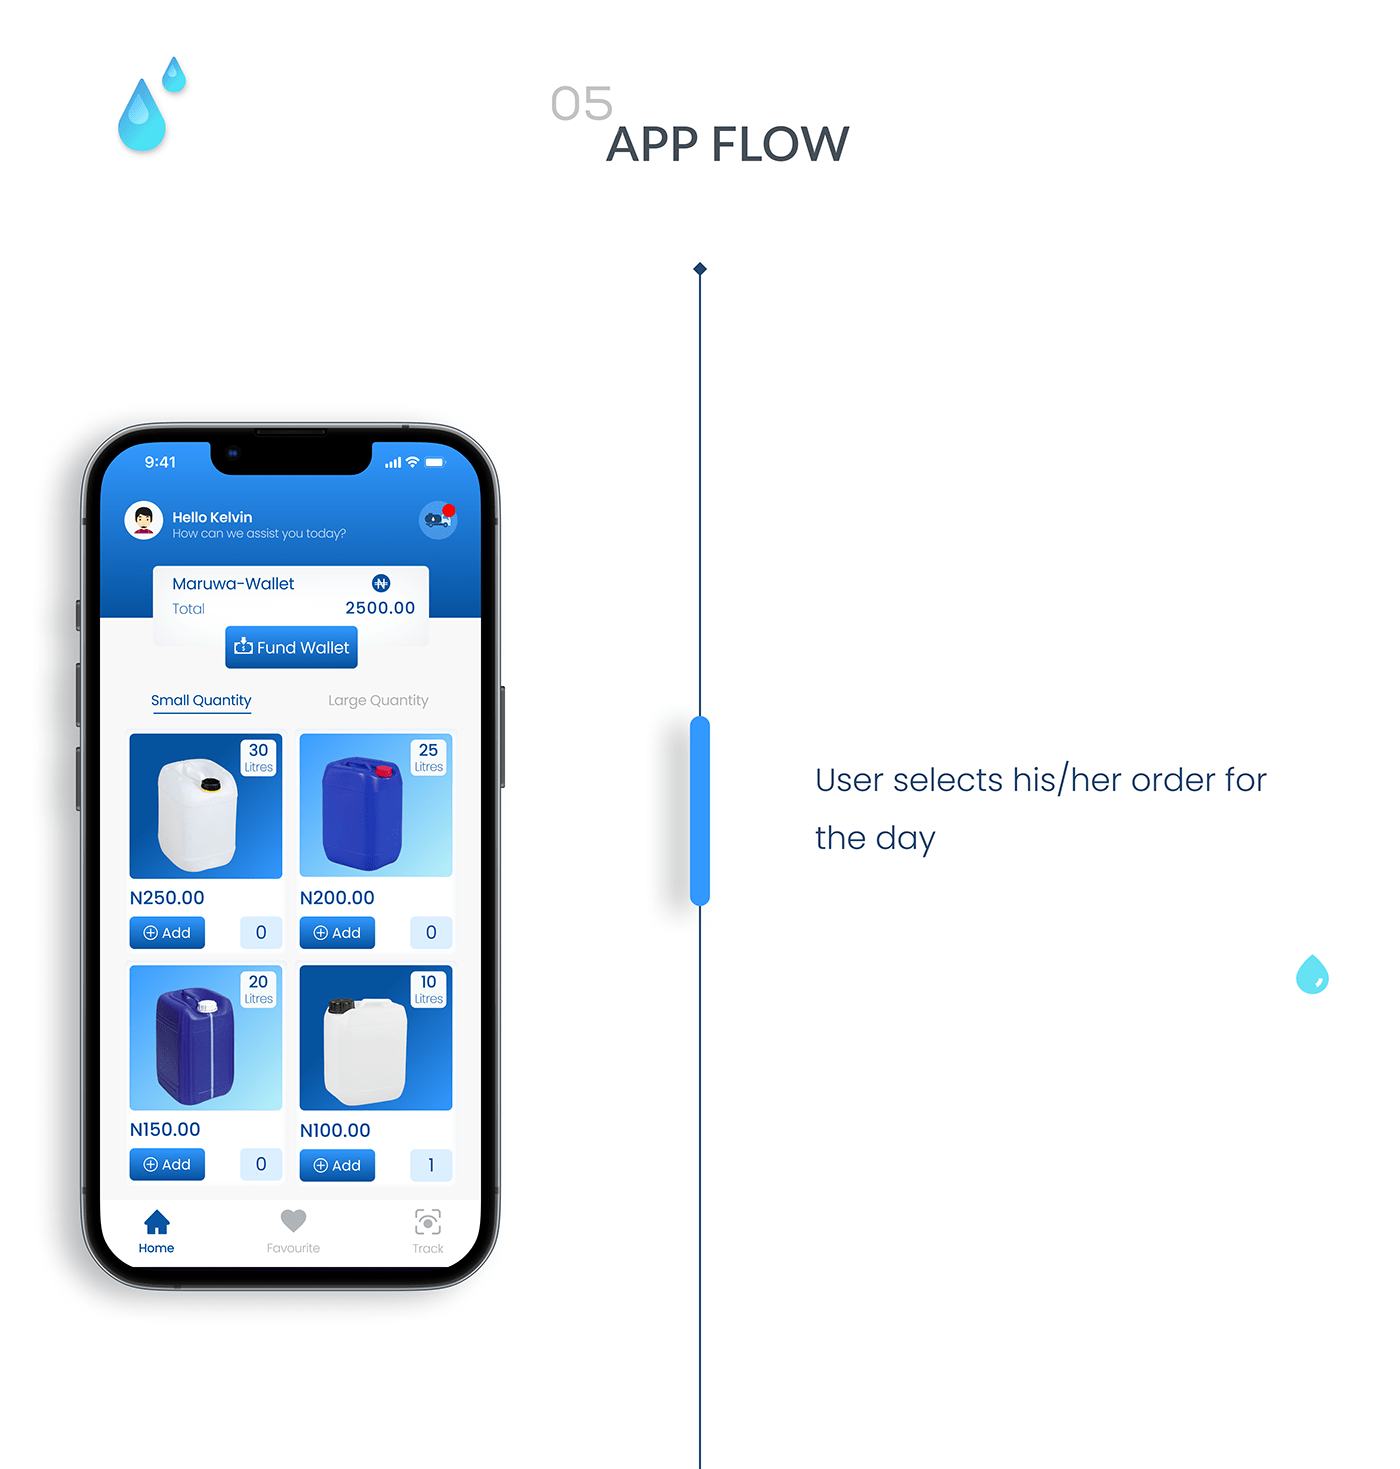 delivery service maruwa Mobile app mobile design tanker UI/UX user interface UX design water app water supply app